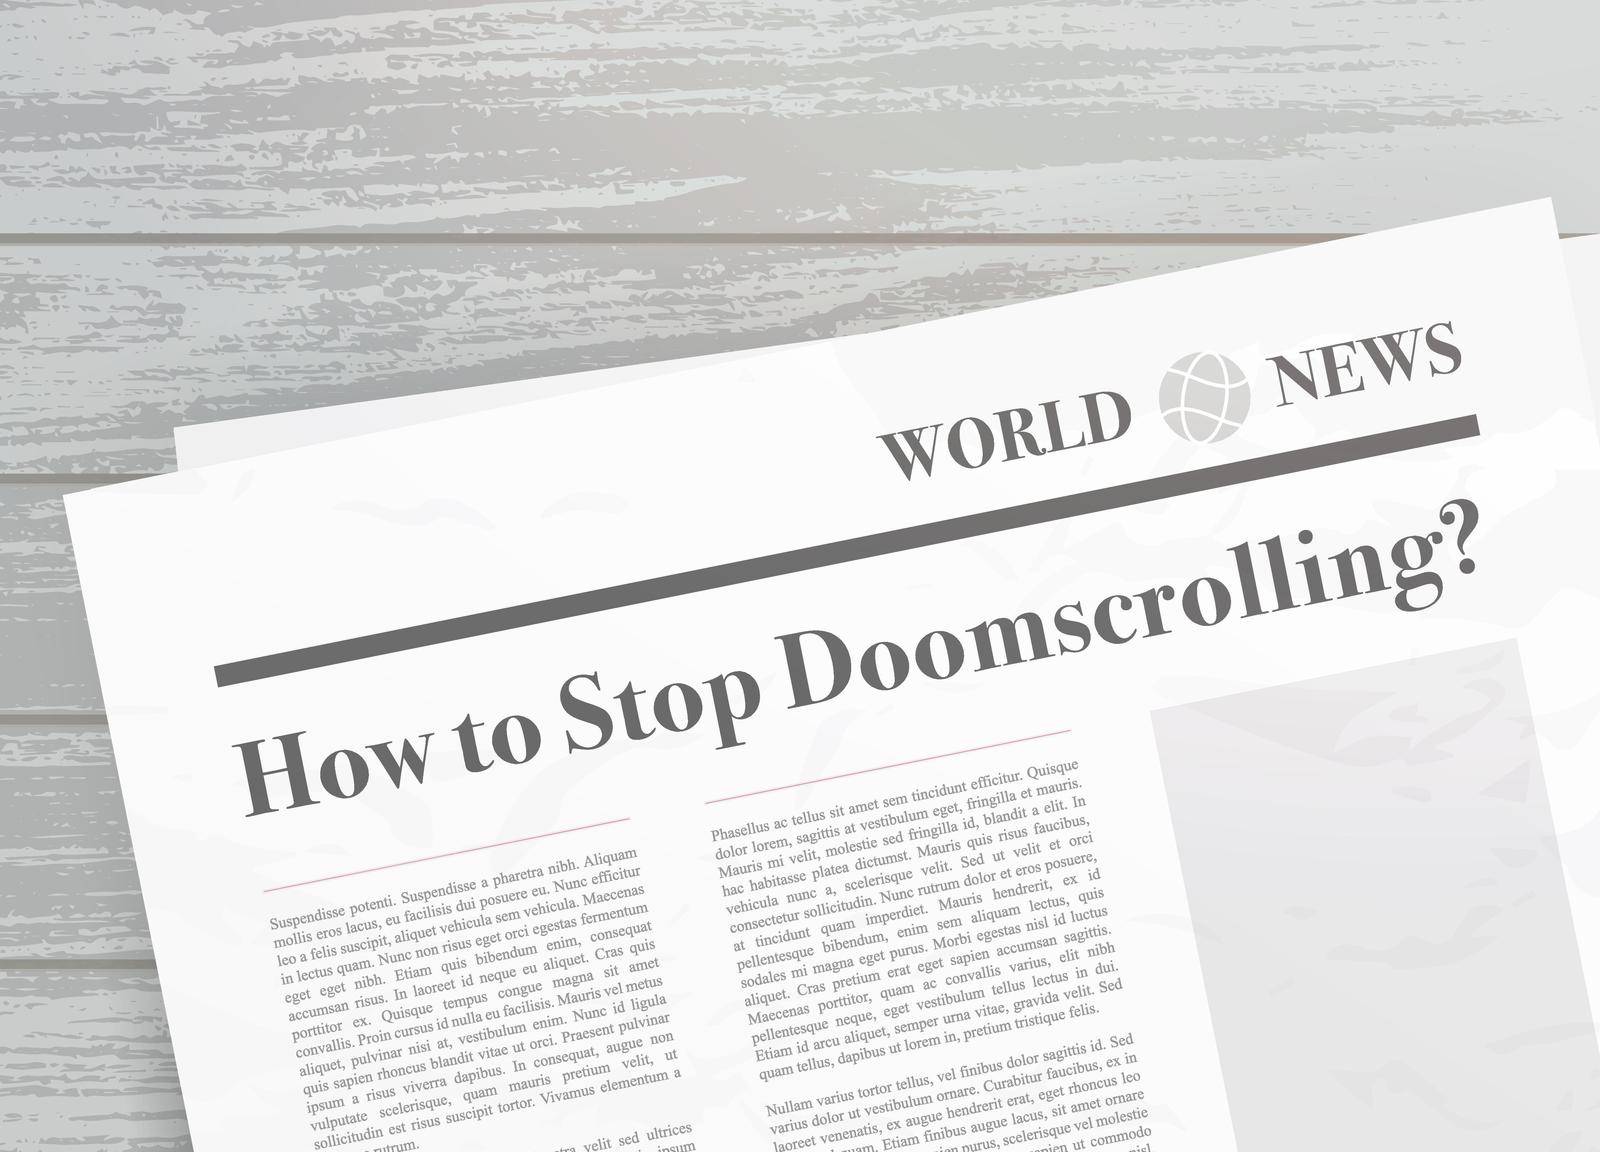 How to stop Doomscrolling. Newspaper headline concept. Doomsurfing - act of spending an excessive amount of screen time devoted to the absorption of negative news. Vector illustration